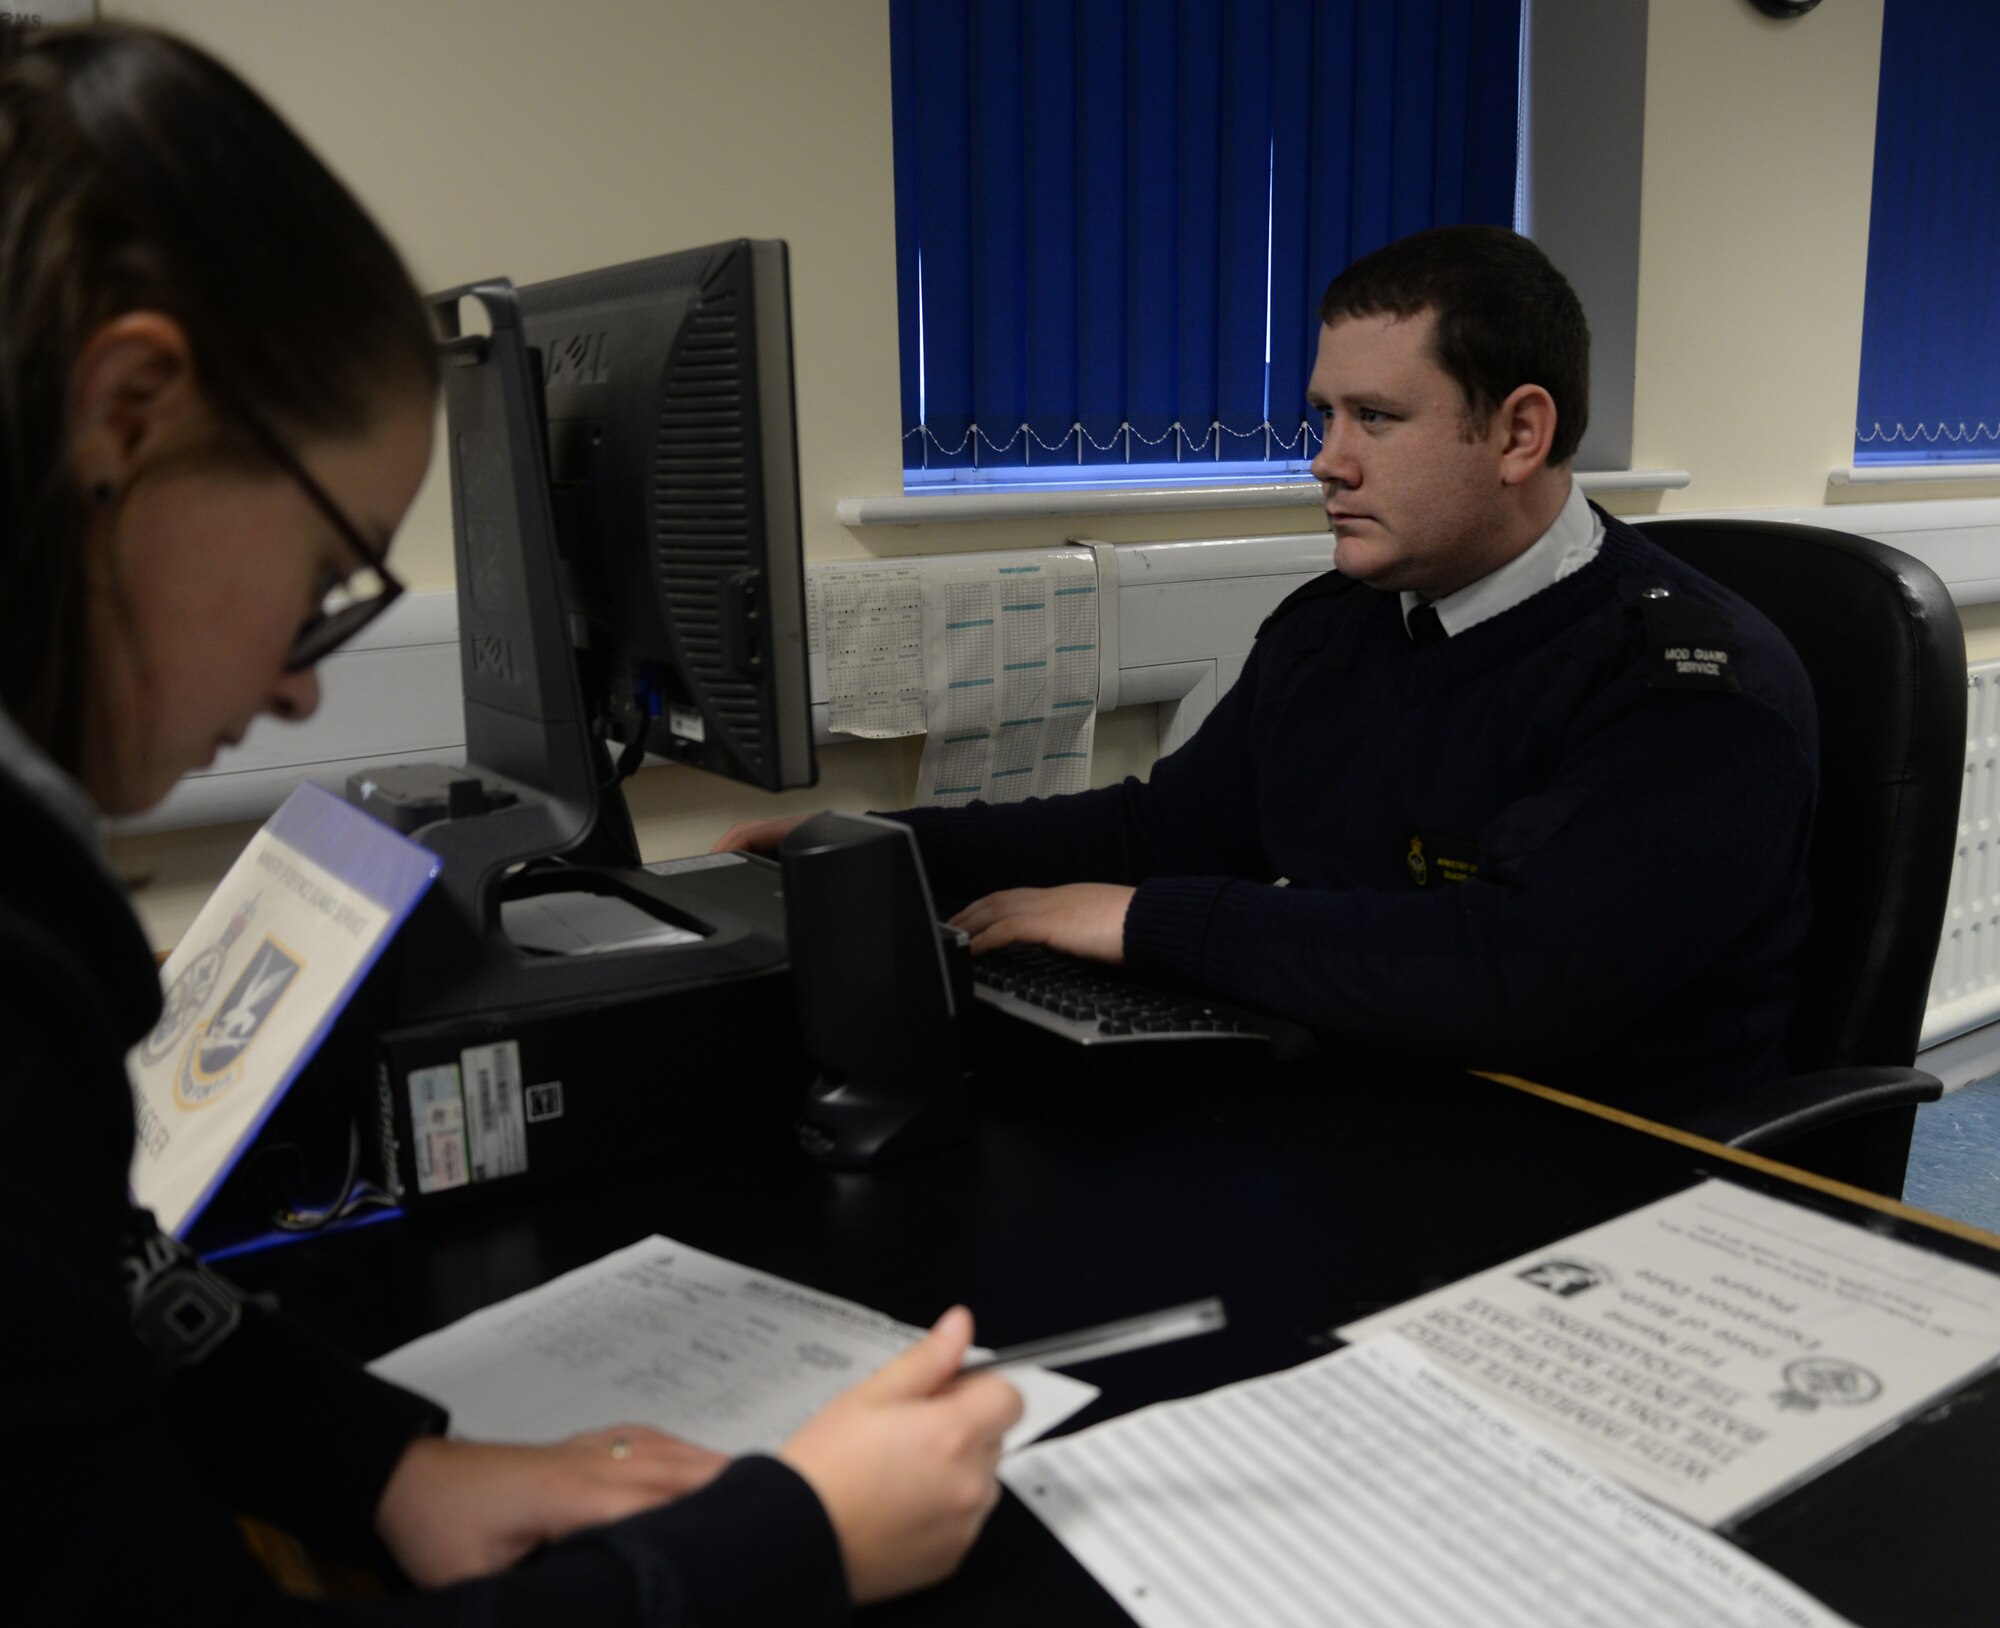 Chris Kelly, 100th Security Forces Squadron/Ministry of Defence Guard Service civilian security officer, creates a pass for a base member Dec. 15, 2015, at the visitor center on RAF Mildenhall, England. On an average day, officers inspect anywhere from 160 to 300 vehicles. Members inspect a range of cars including heavy-goods vehicles, contracting staff and visitors to the base. (U.S. Air Force photo by Senior Airman Christine Halan/Released)